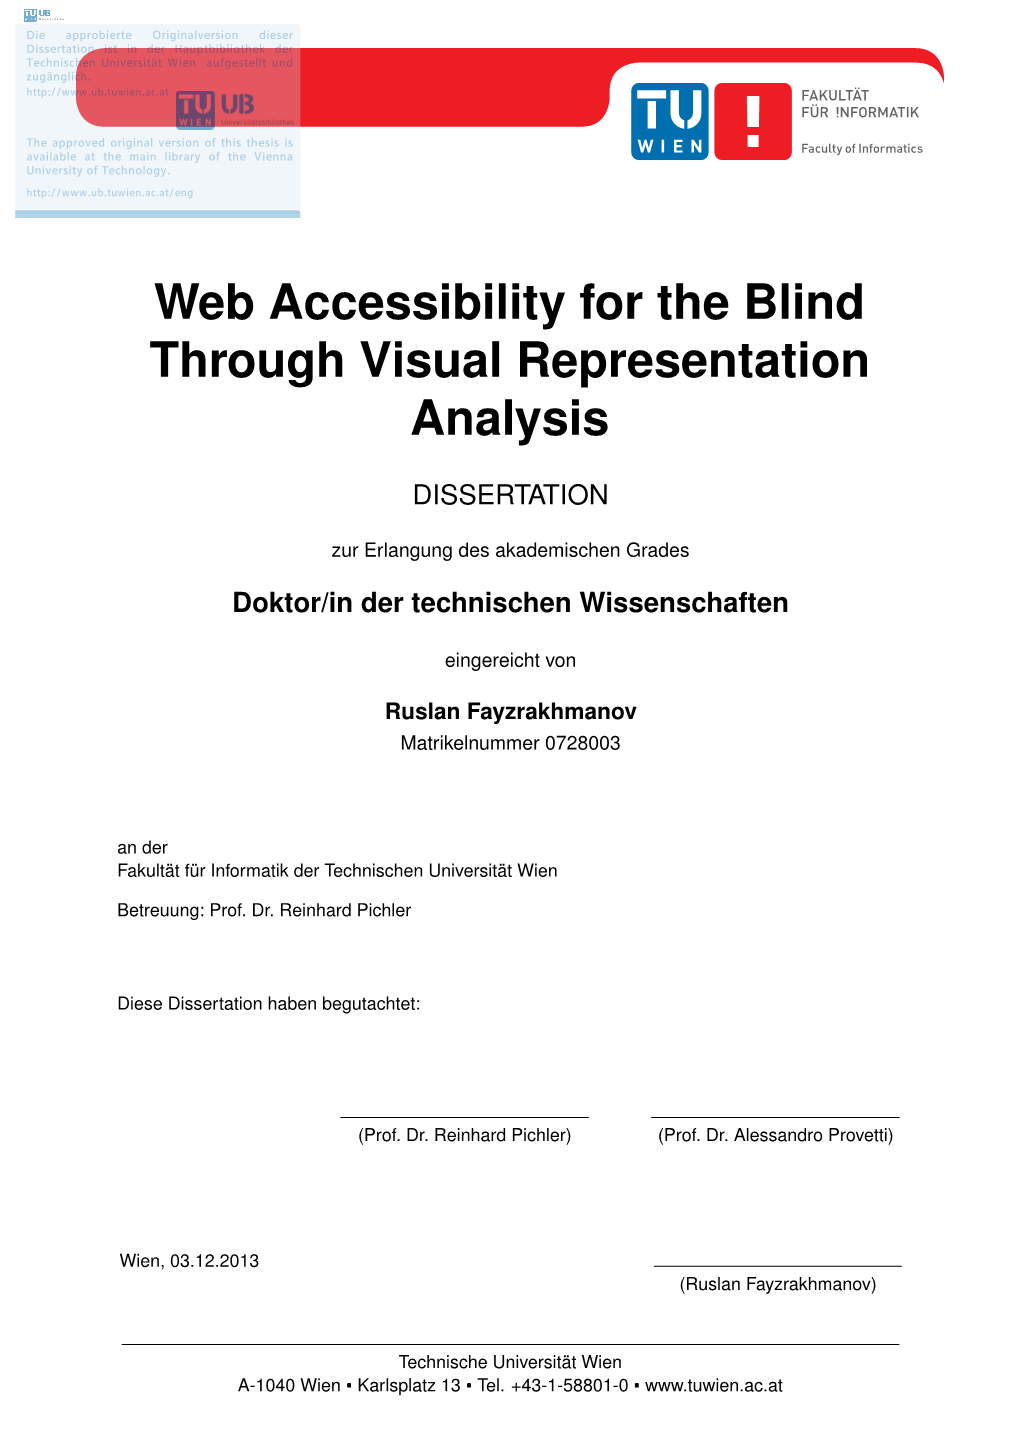 Web Accessibility for the Blind Through Visual Representation Analysis